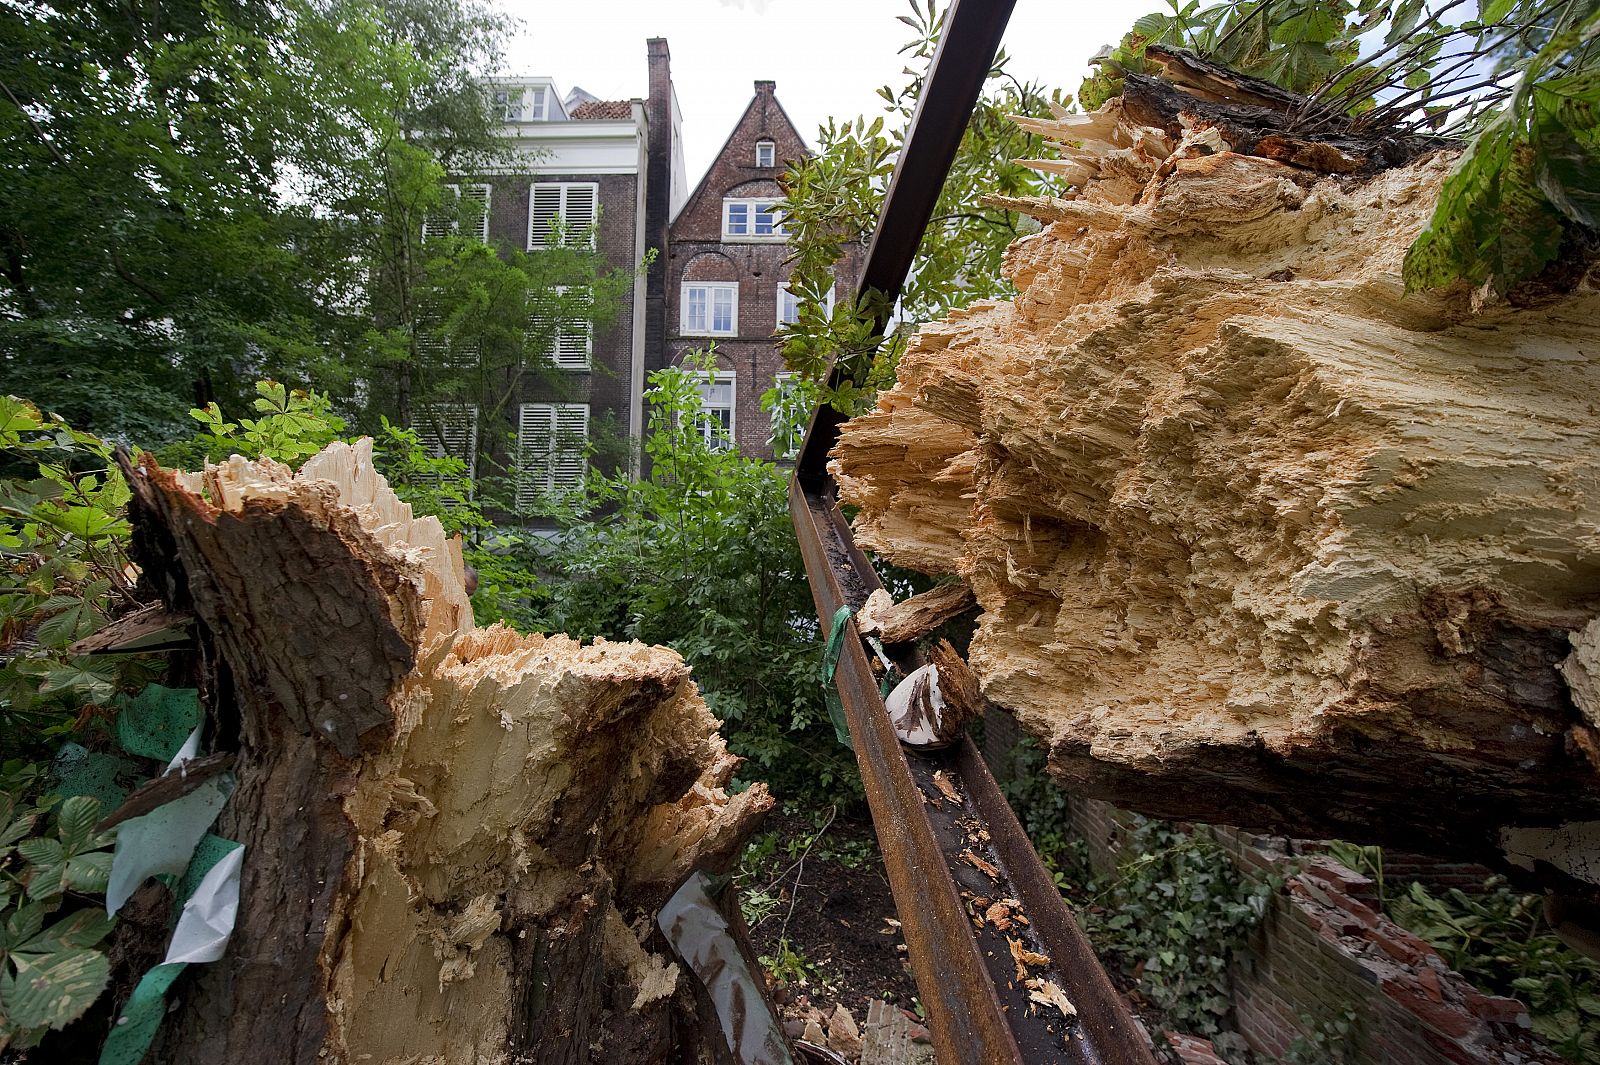 The collapsed chestnut tree, which comforted Dutch diarist Anne Frank while she hid from the Nazis during World War II, is seen in Amsterdam